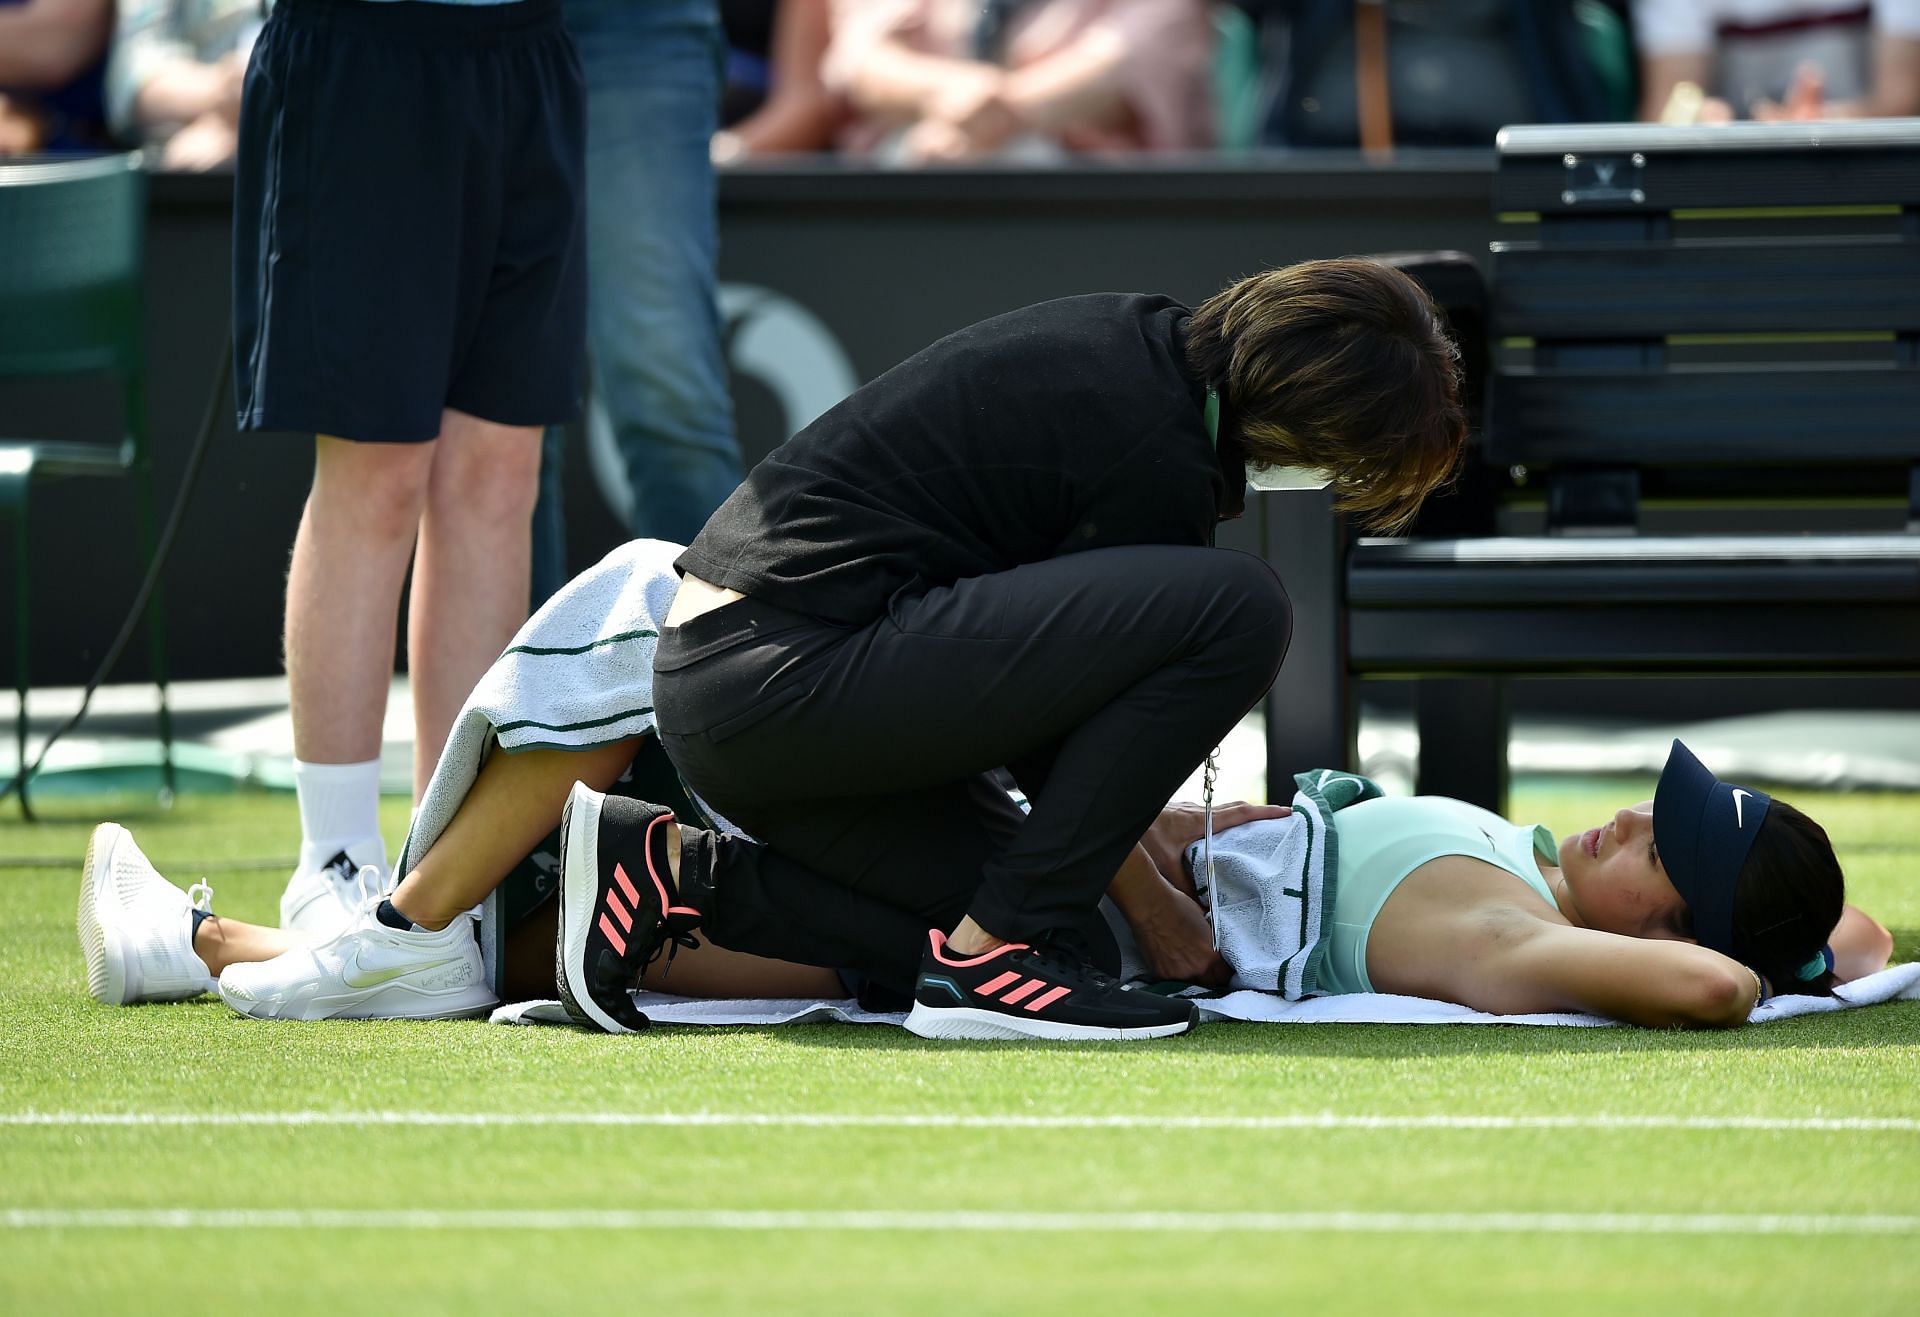 Emma Raducanu receives treatment during her match at the Rothesay Open in Nottingham